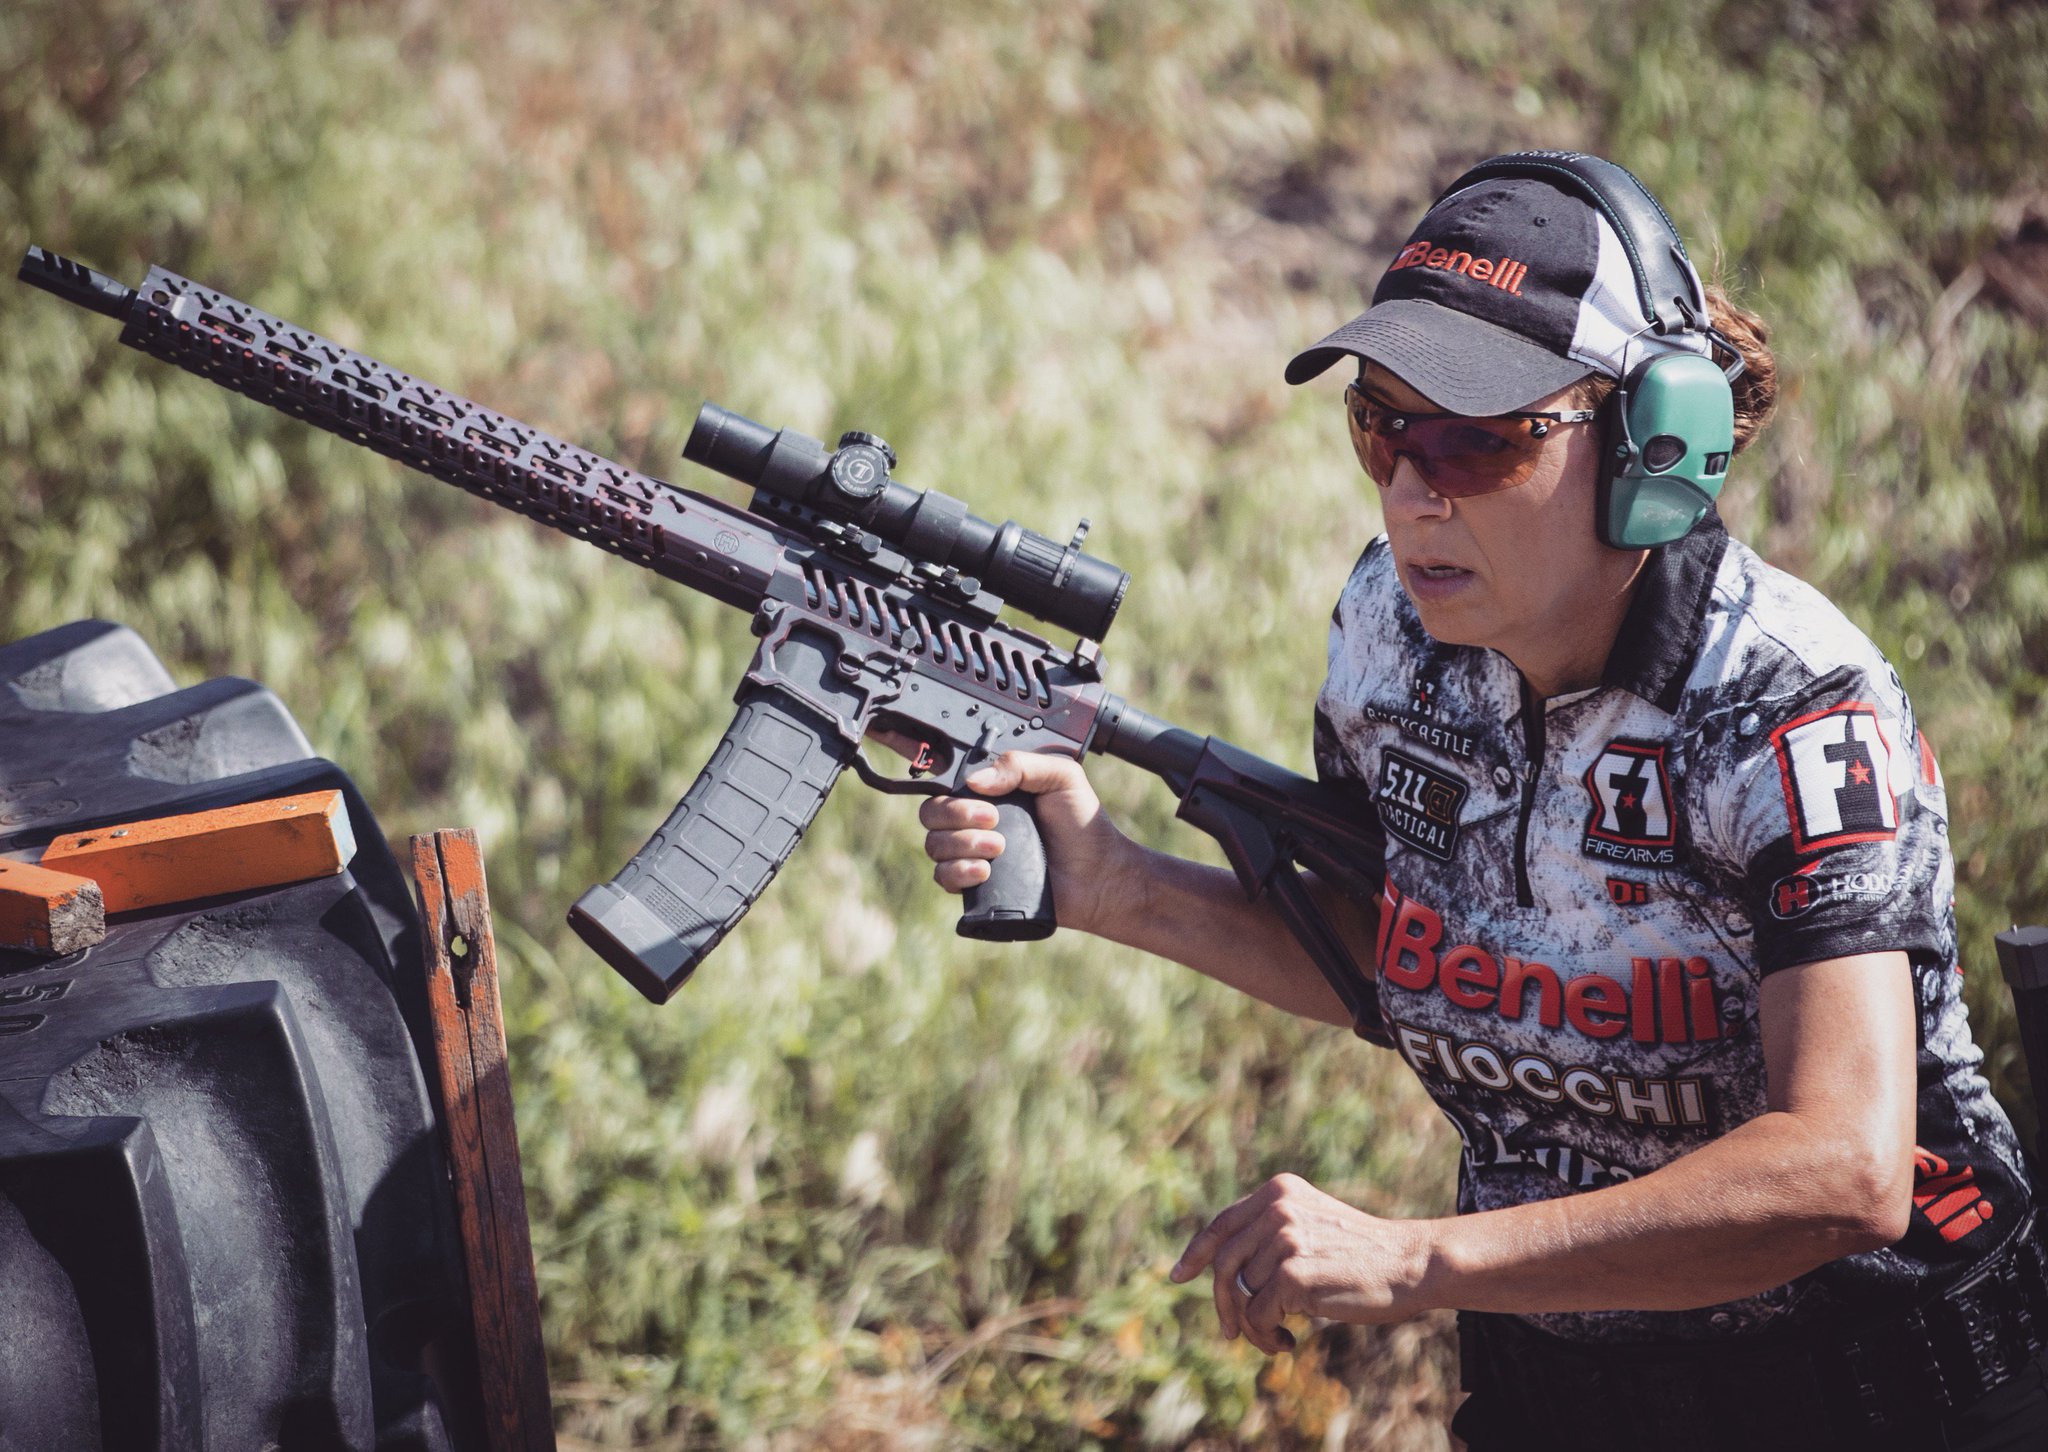 LifeZette: Women Love Shooting Responsibly, and They’re Here to Stay